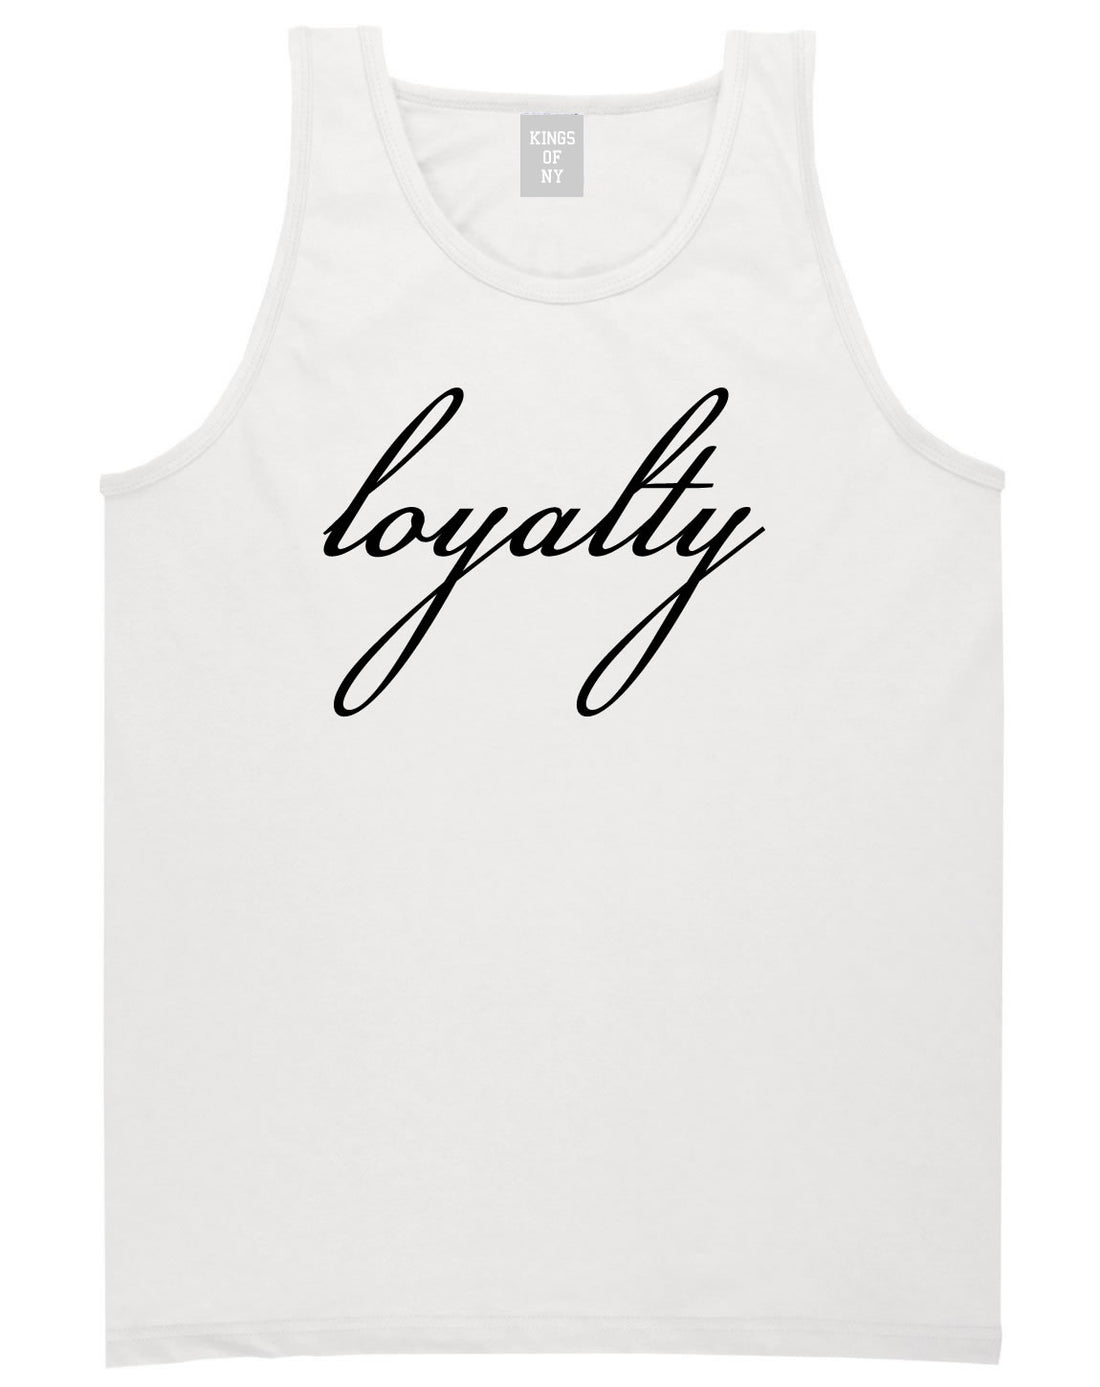 Loyalty Respect Aint New York Hoes Tank Top In White by Kings Of NY